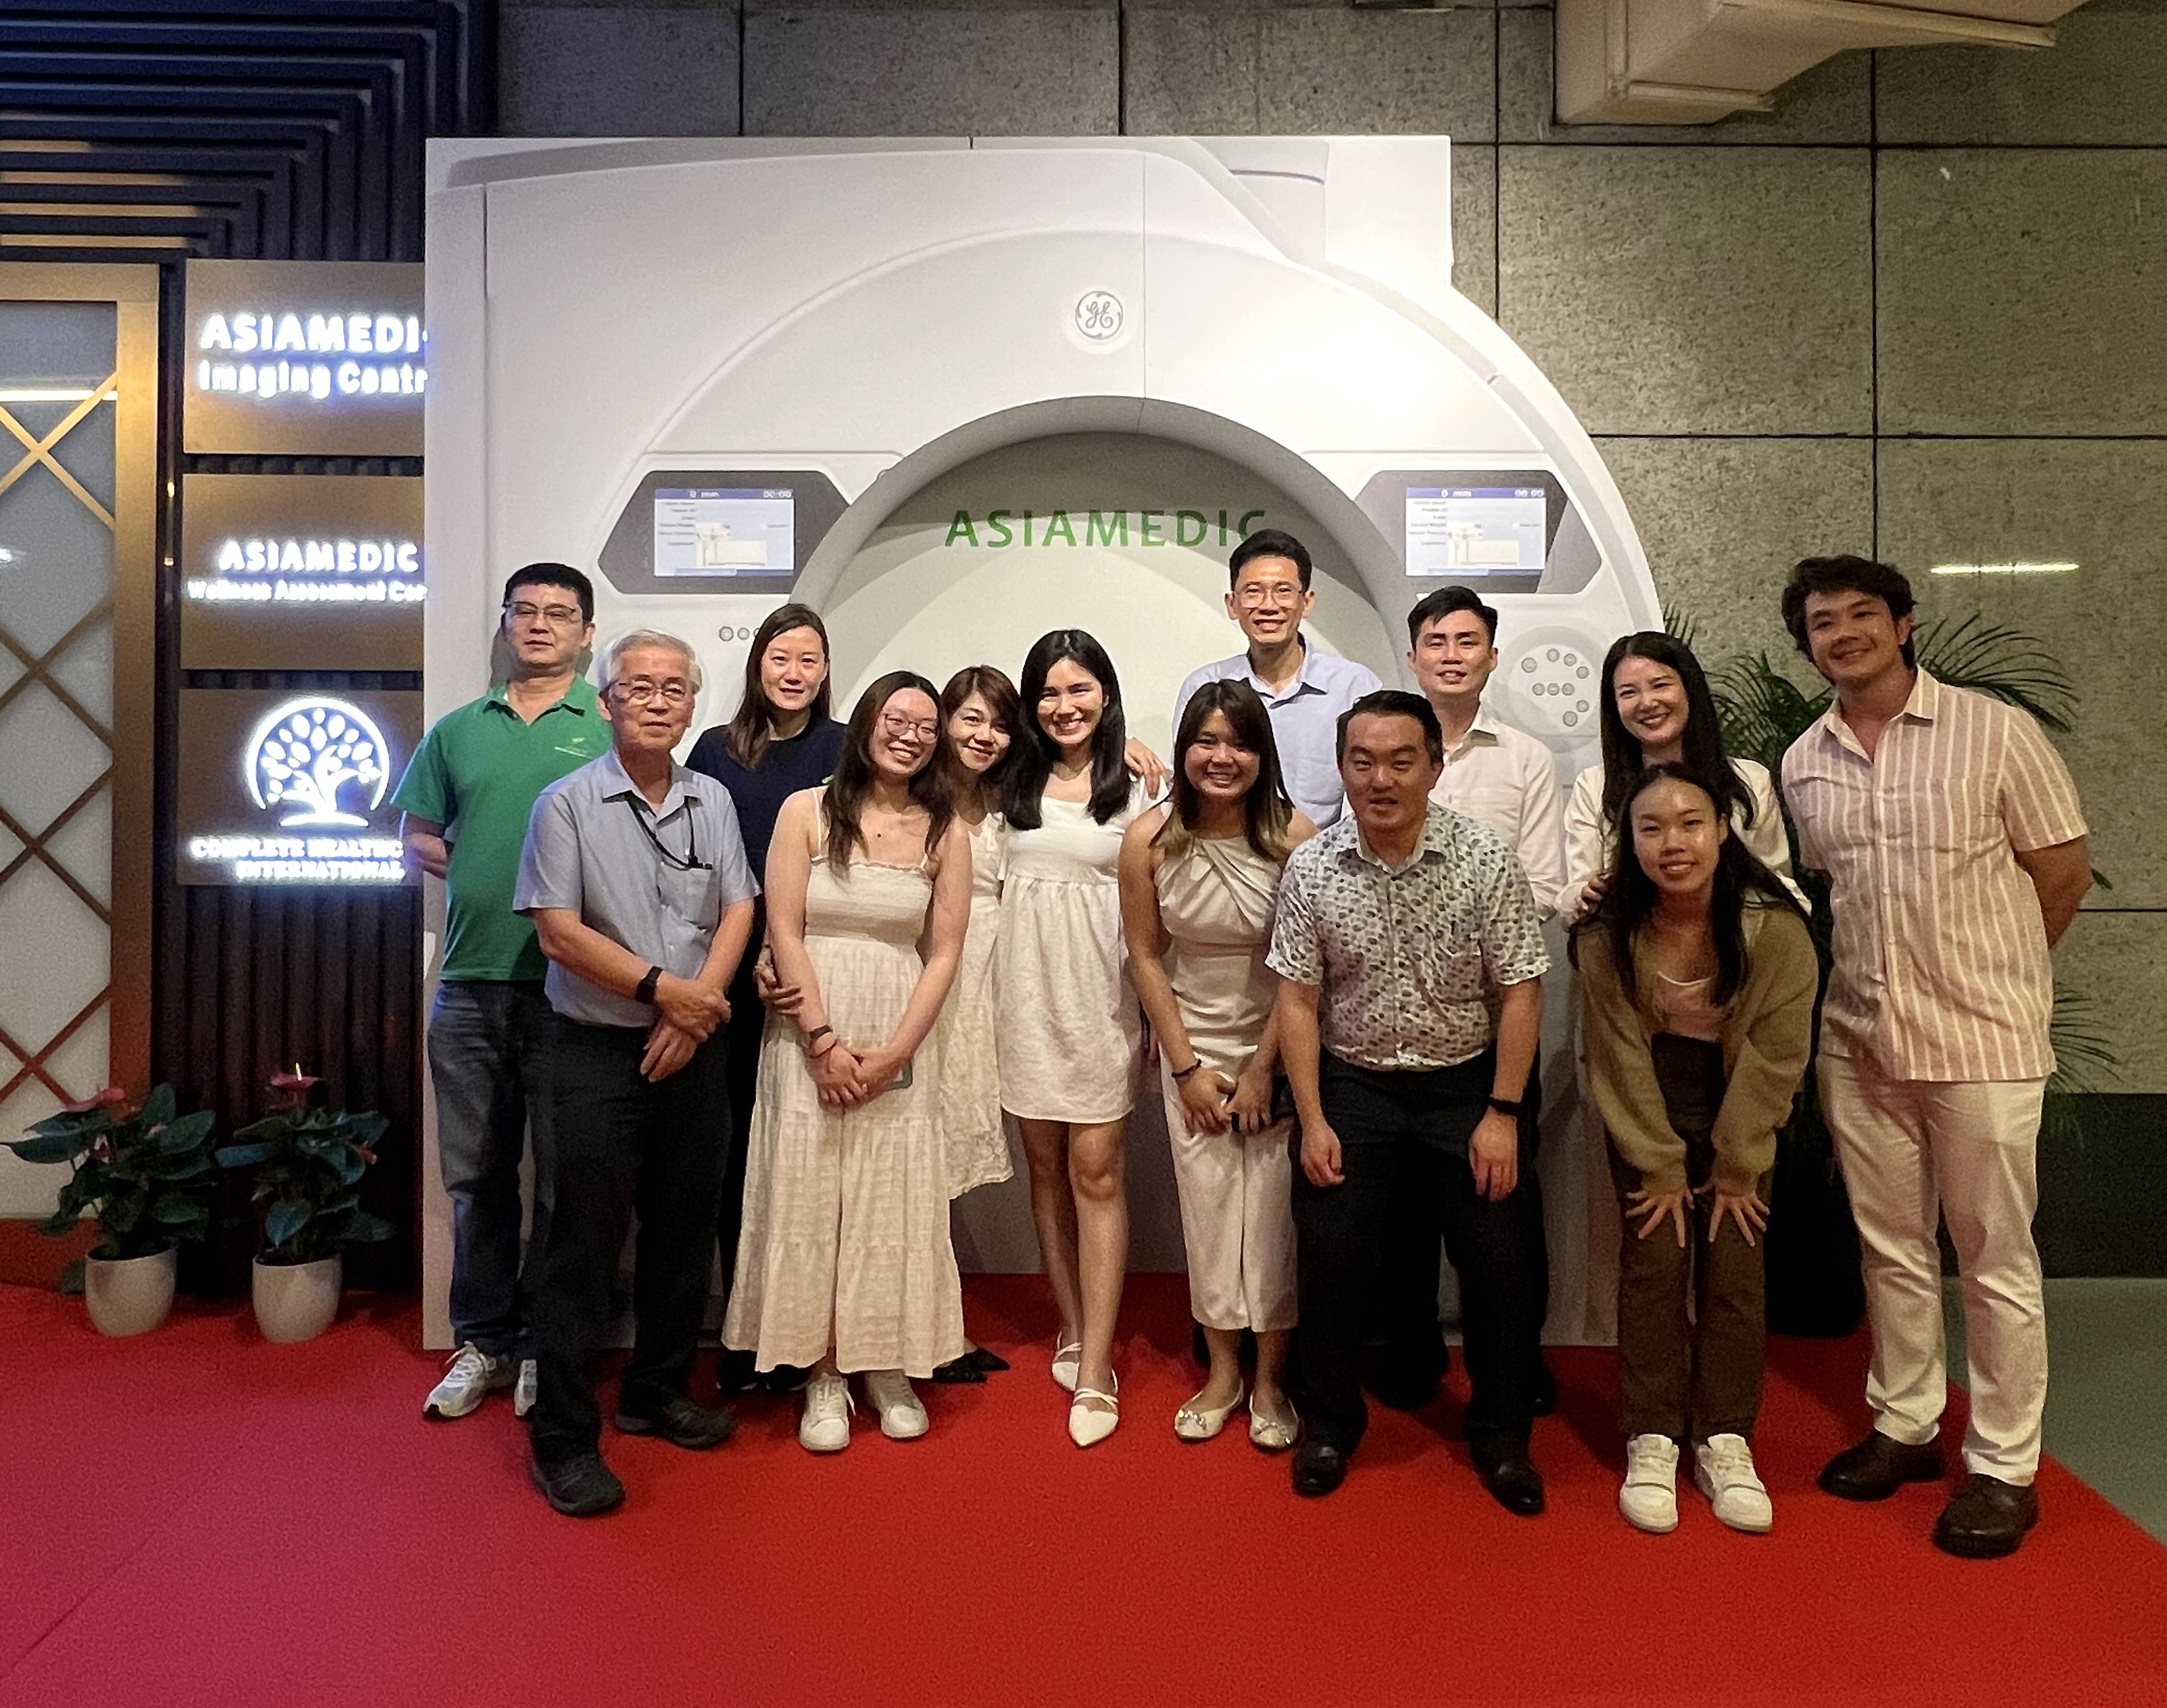 AsiaMedic Sets New Standard in Healthcare with Installation of First SIGNA™ Hero 3.0T MRI Scanner in Asia-Pacific